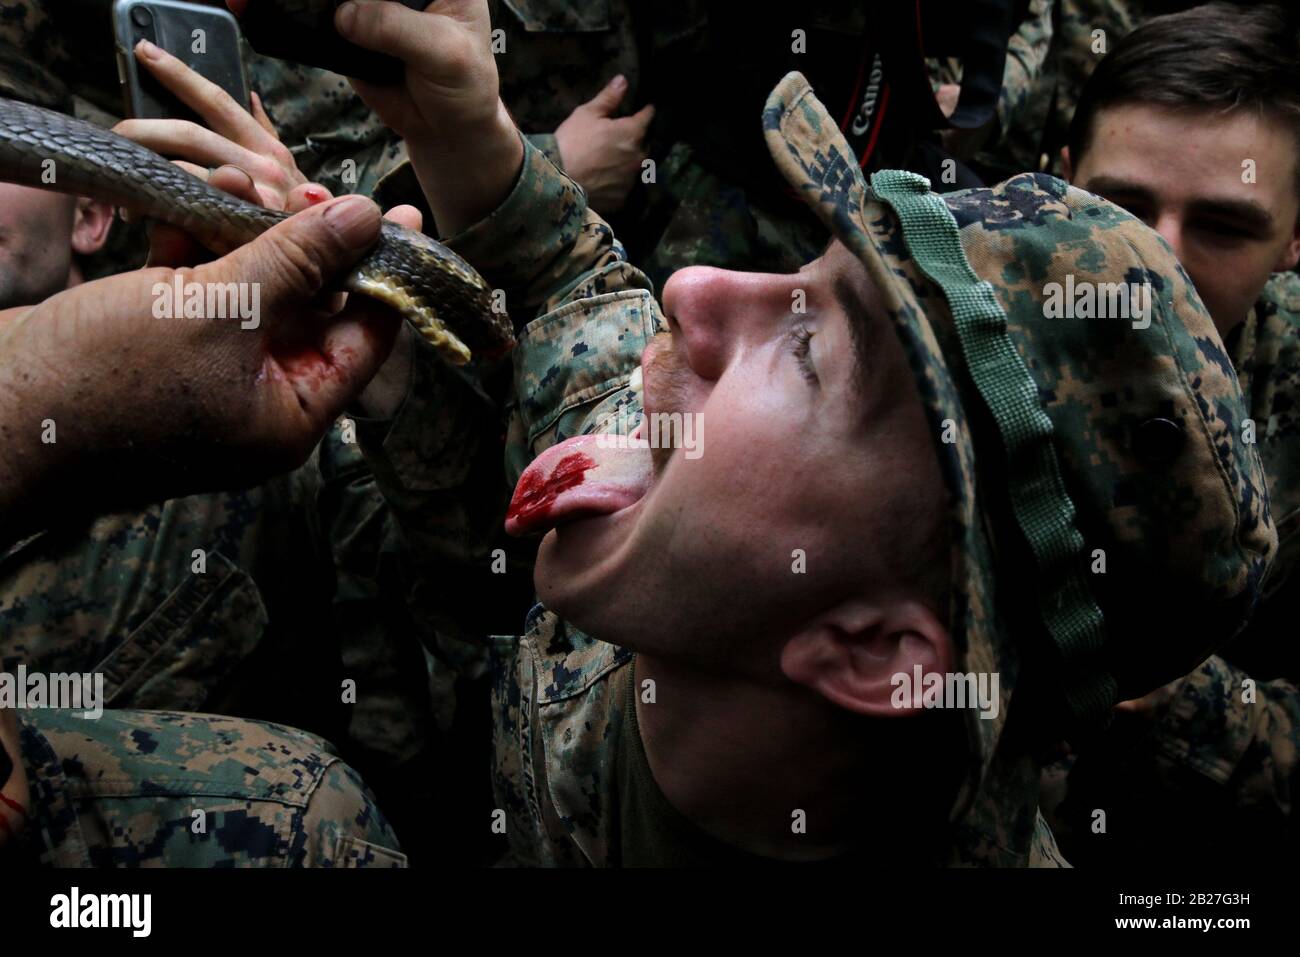 Chanthaburi, Thailand. 1st Mar, 2020. US Marines drink cobra's blood offered by a Thai Navy during a jungle survival training as part of the military exercise Cobra Gold 2020 at a Navy base in Chanthaburi province. March 01, 2020. The 39th annual Cobra Gold military exercise is an event held between the Thai and US armed forces every year. It's the largest Asia-Pacific military exercise held each year, and is among the largest multinational military exercises in which the US participates. Credit: Urdee Image/ZUMA Wire/Alamy Live News Stock Photo